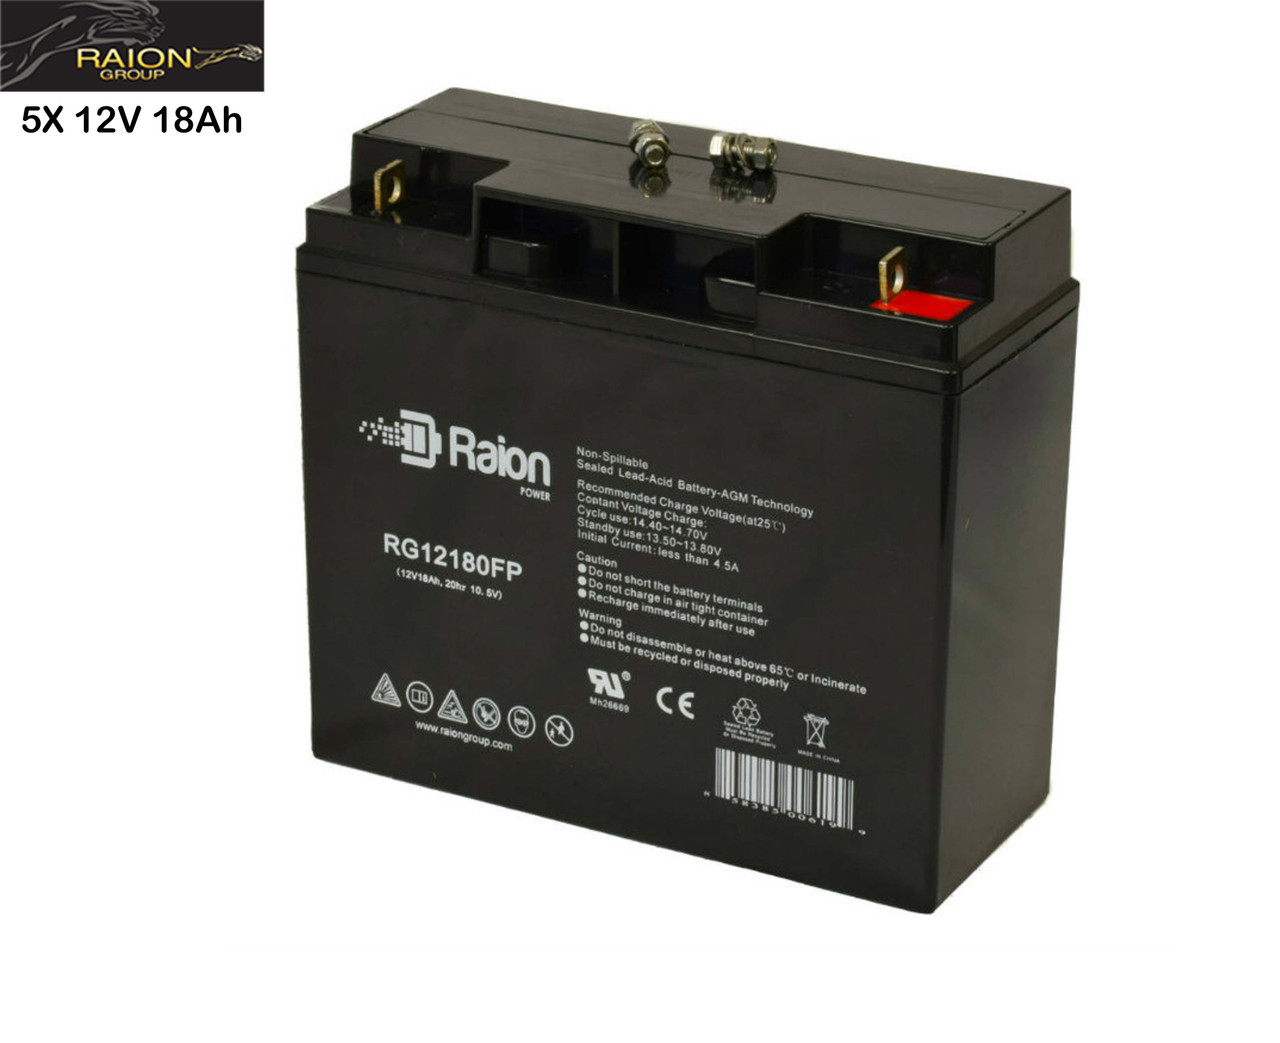 Raion Power Replacement 12V 18Ah Battery for Fun E-Cycle Three Wheeled E-Scooter 108 - 5 Pack